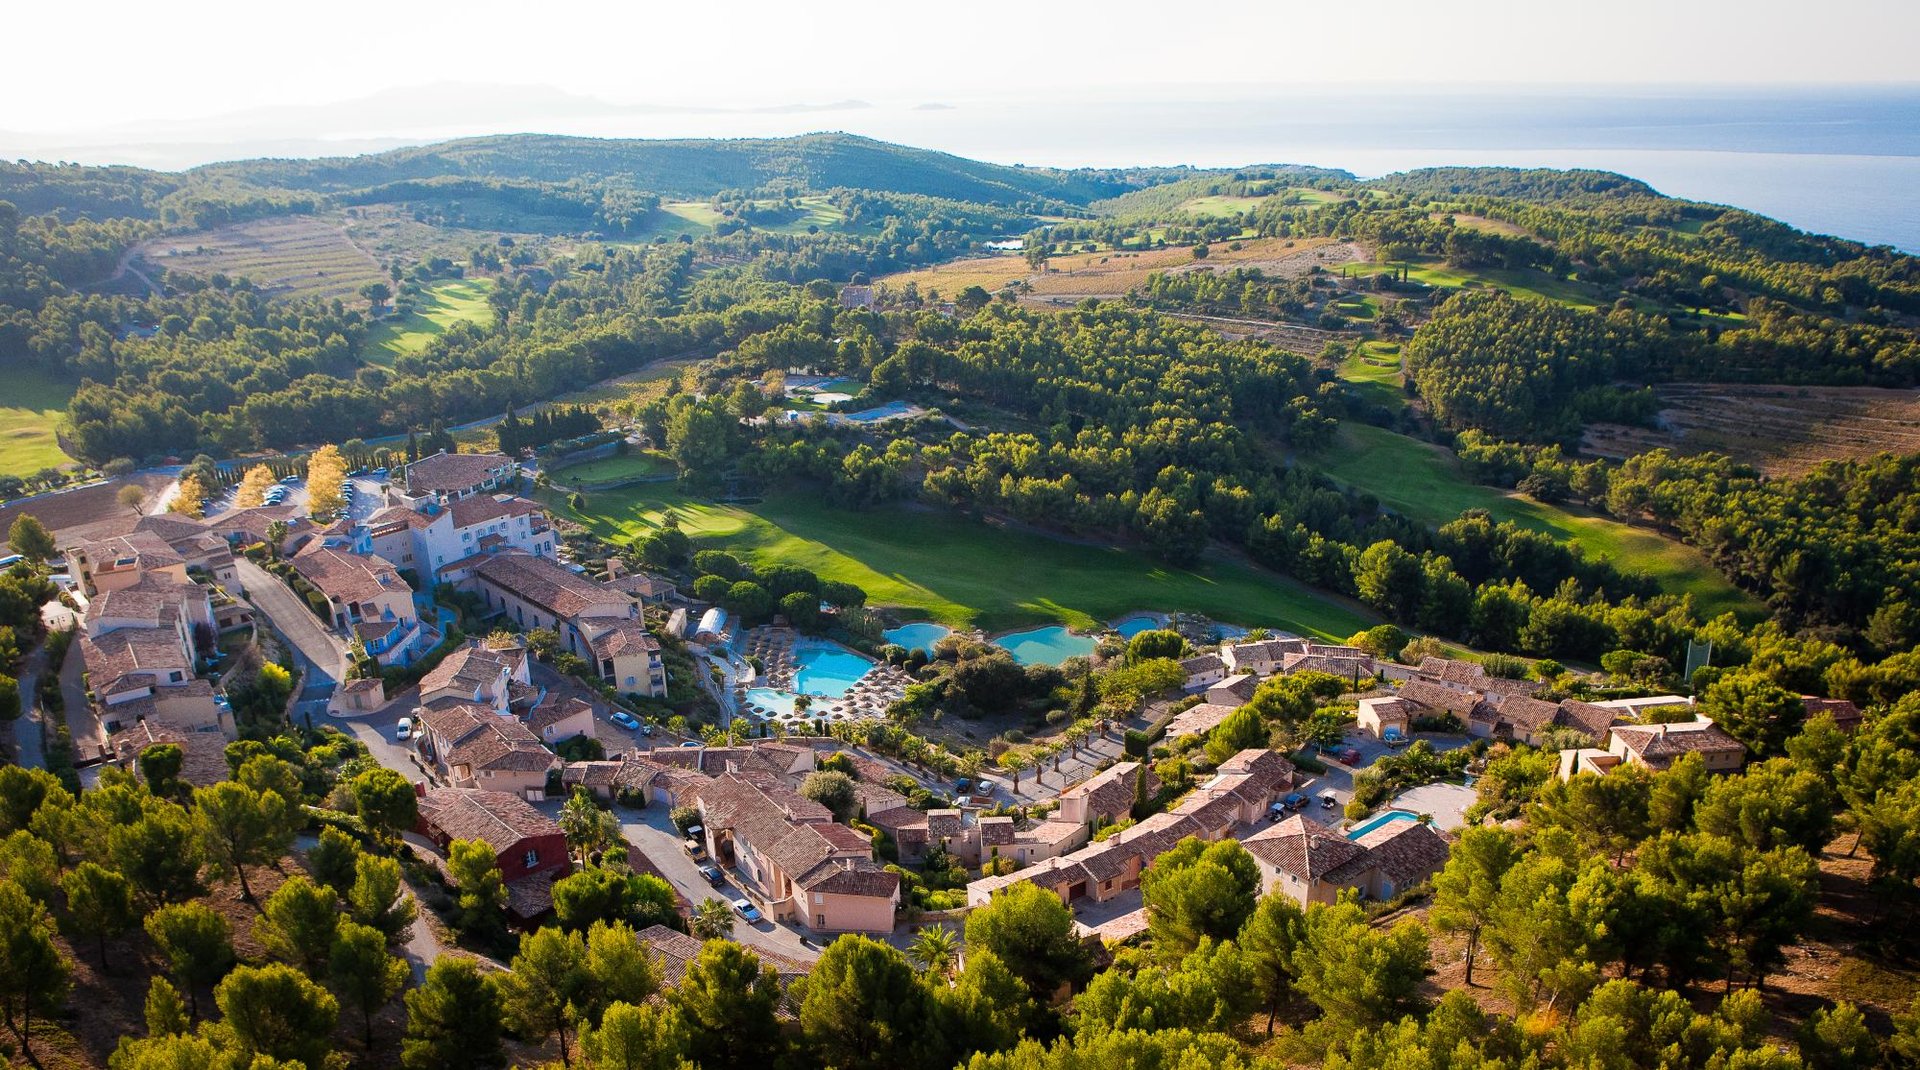 Le Frégate Provence : Resort with swimming pools and Golf near Bandol